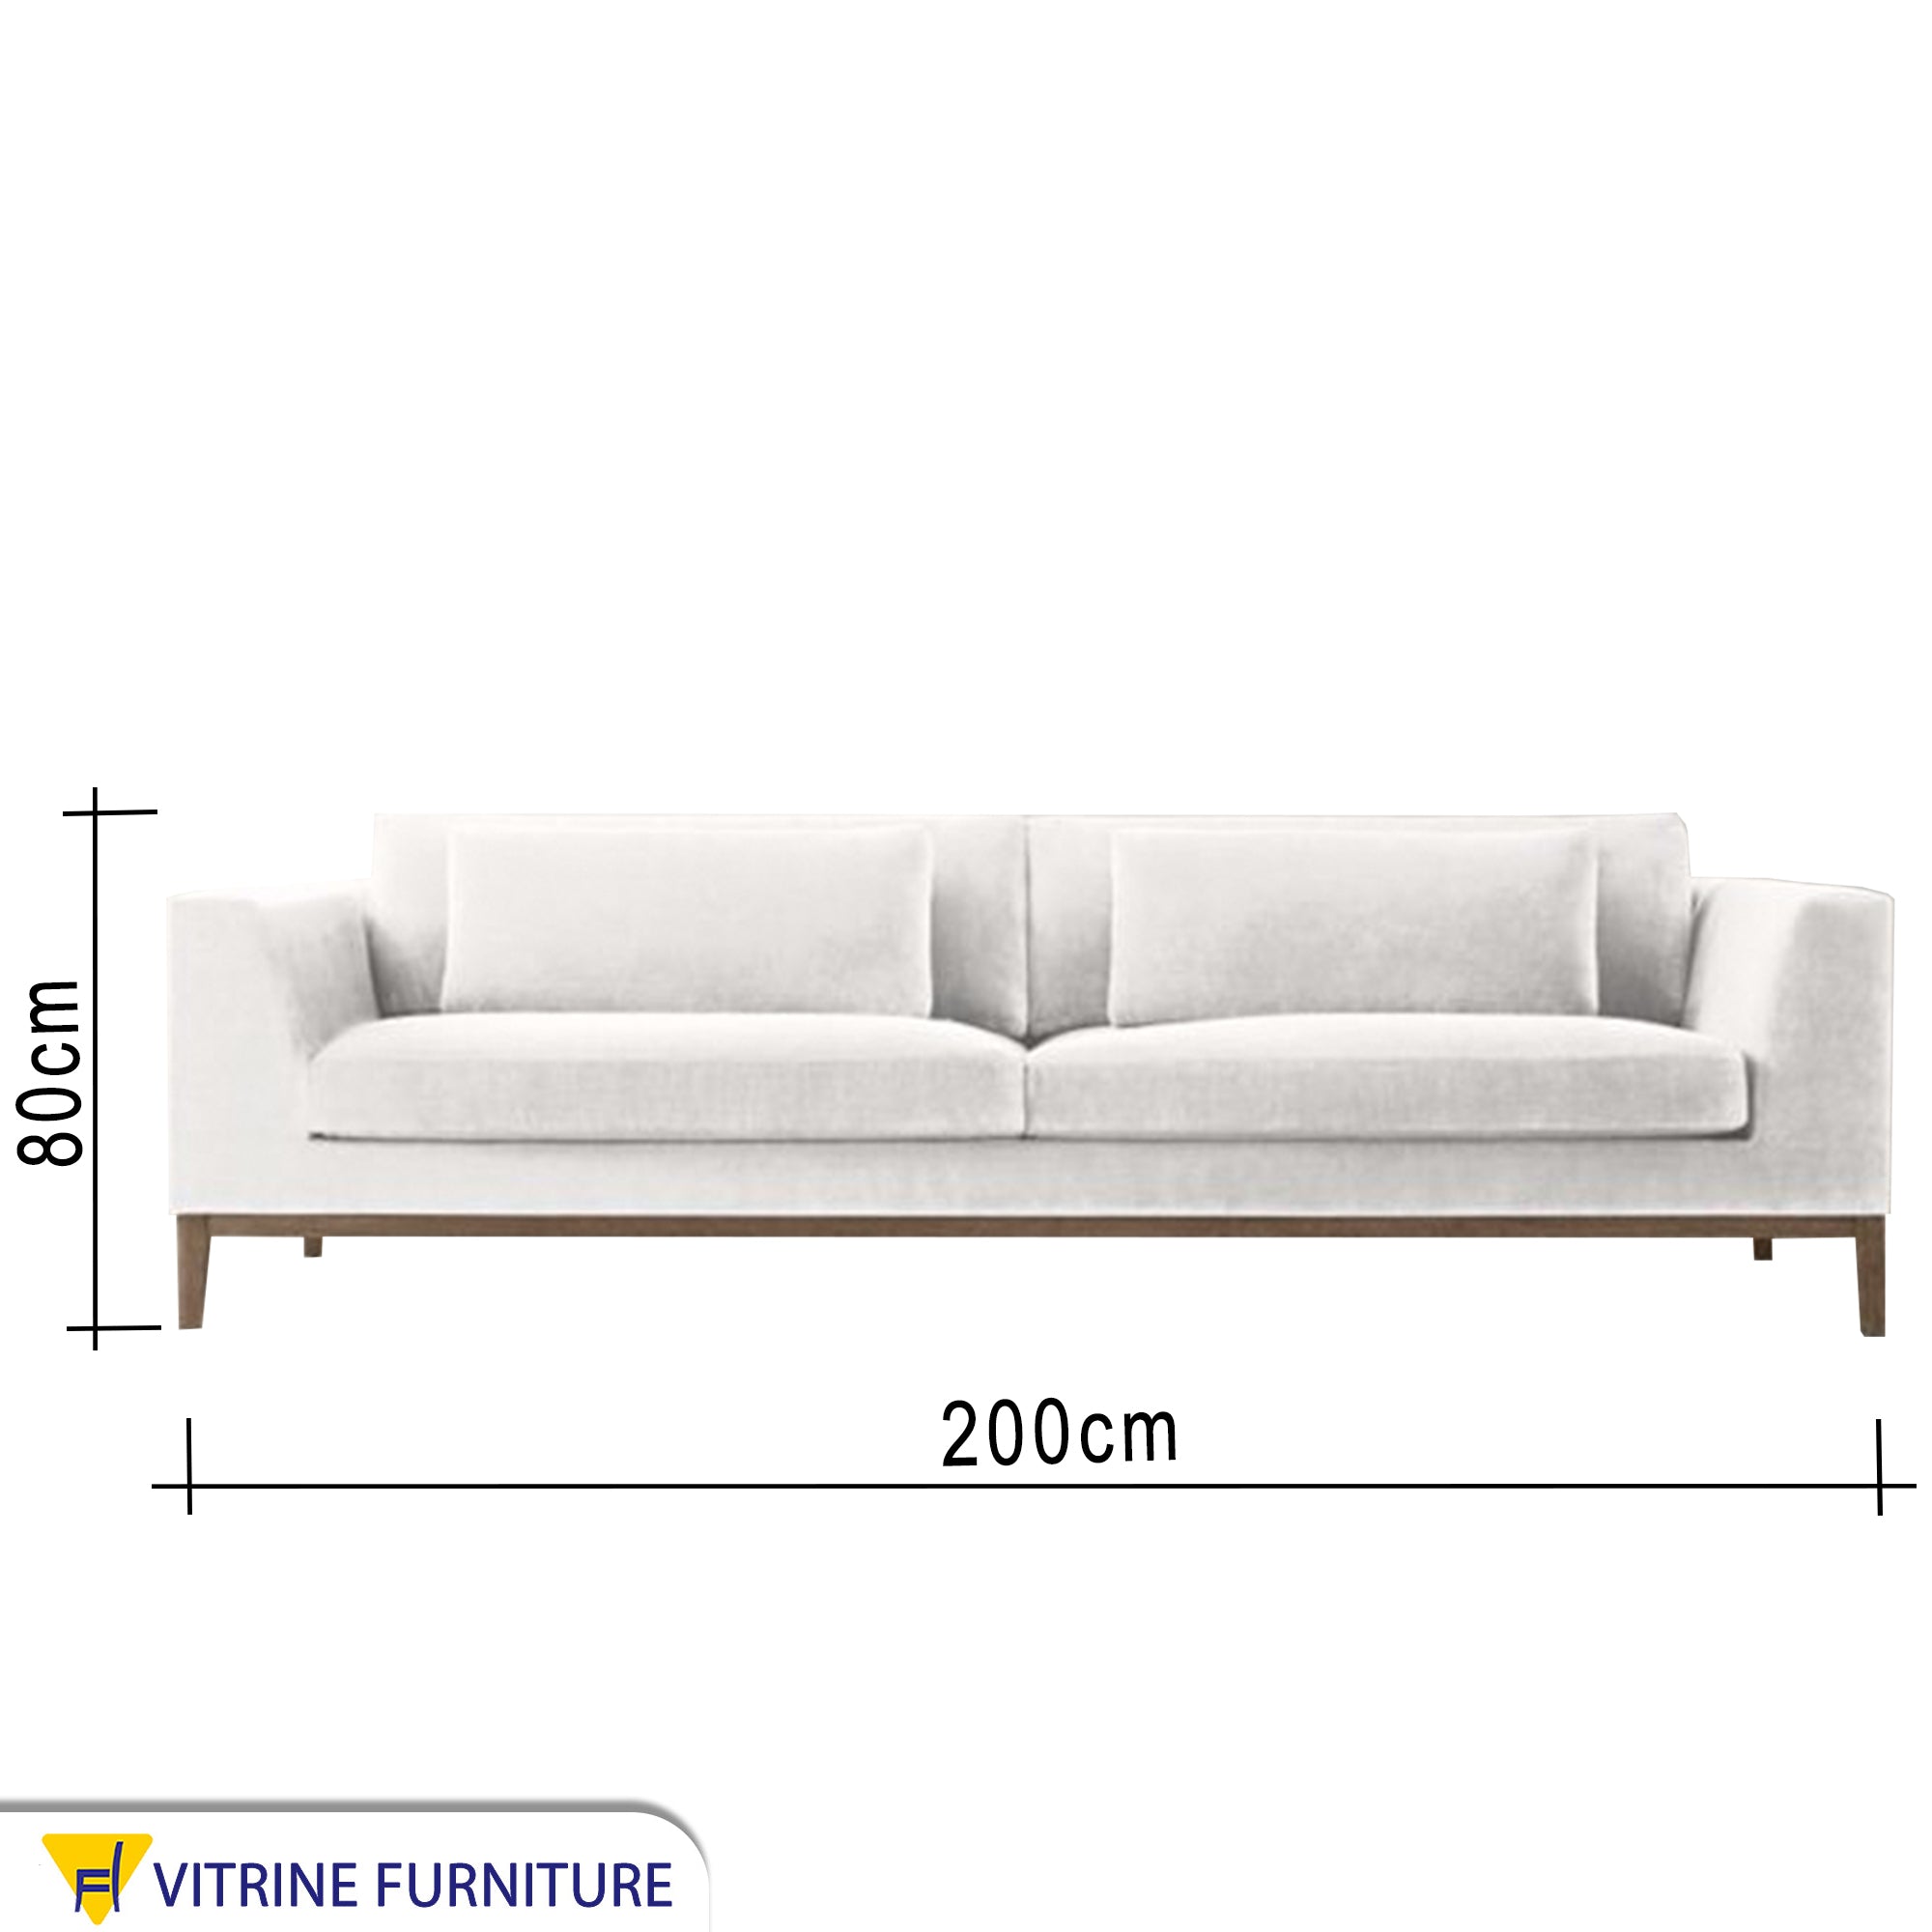 White sofa with movable back cushions